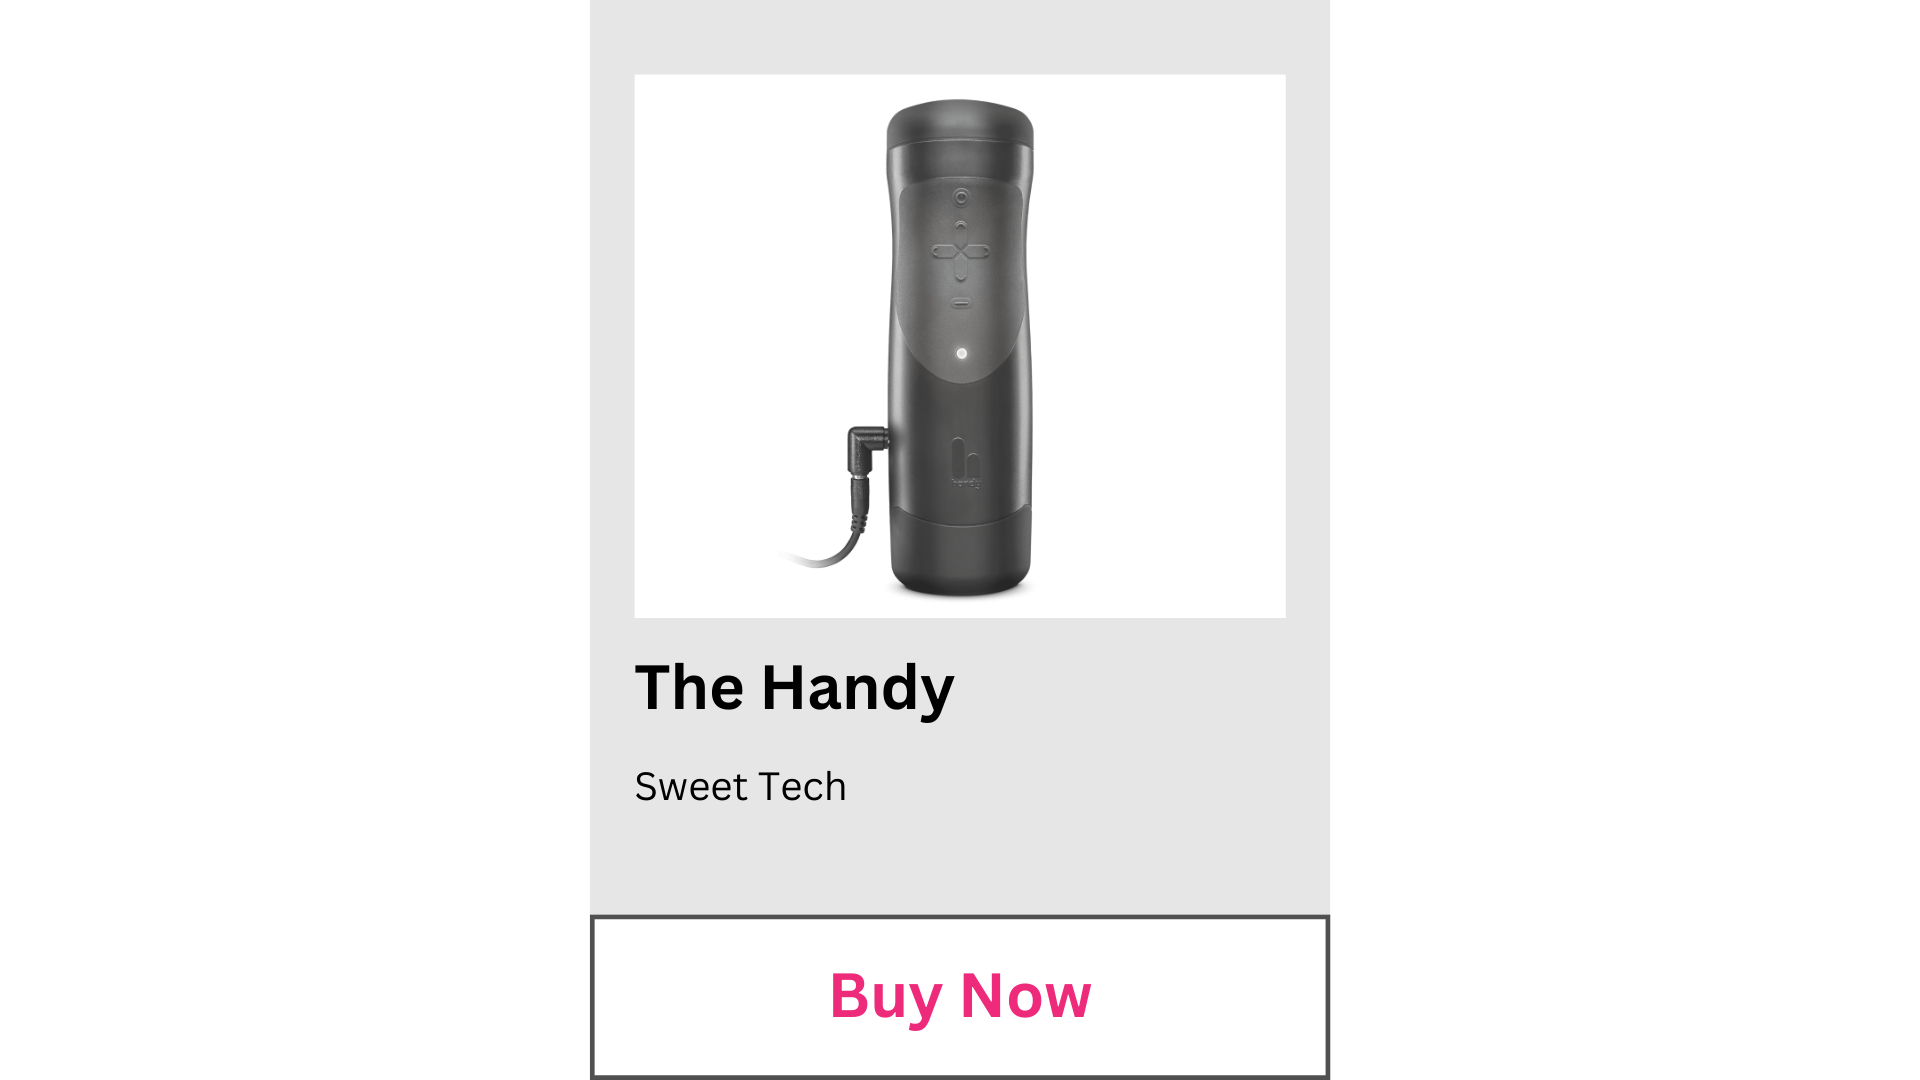 Purchase The Handy, men's app-controlled sex toy.